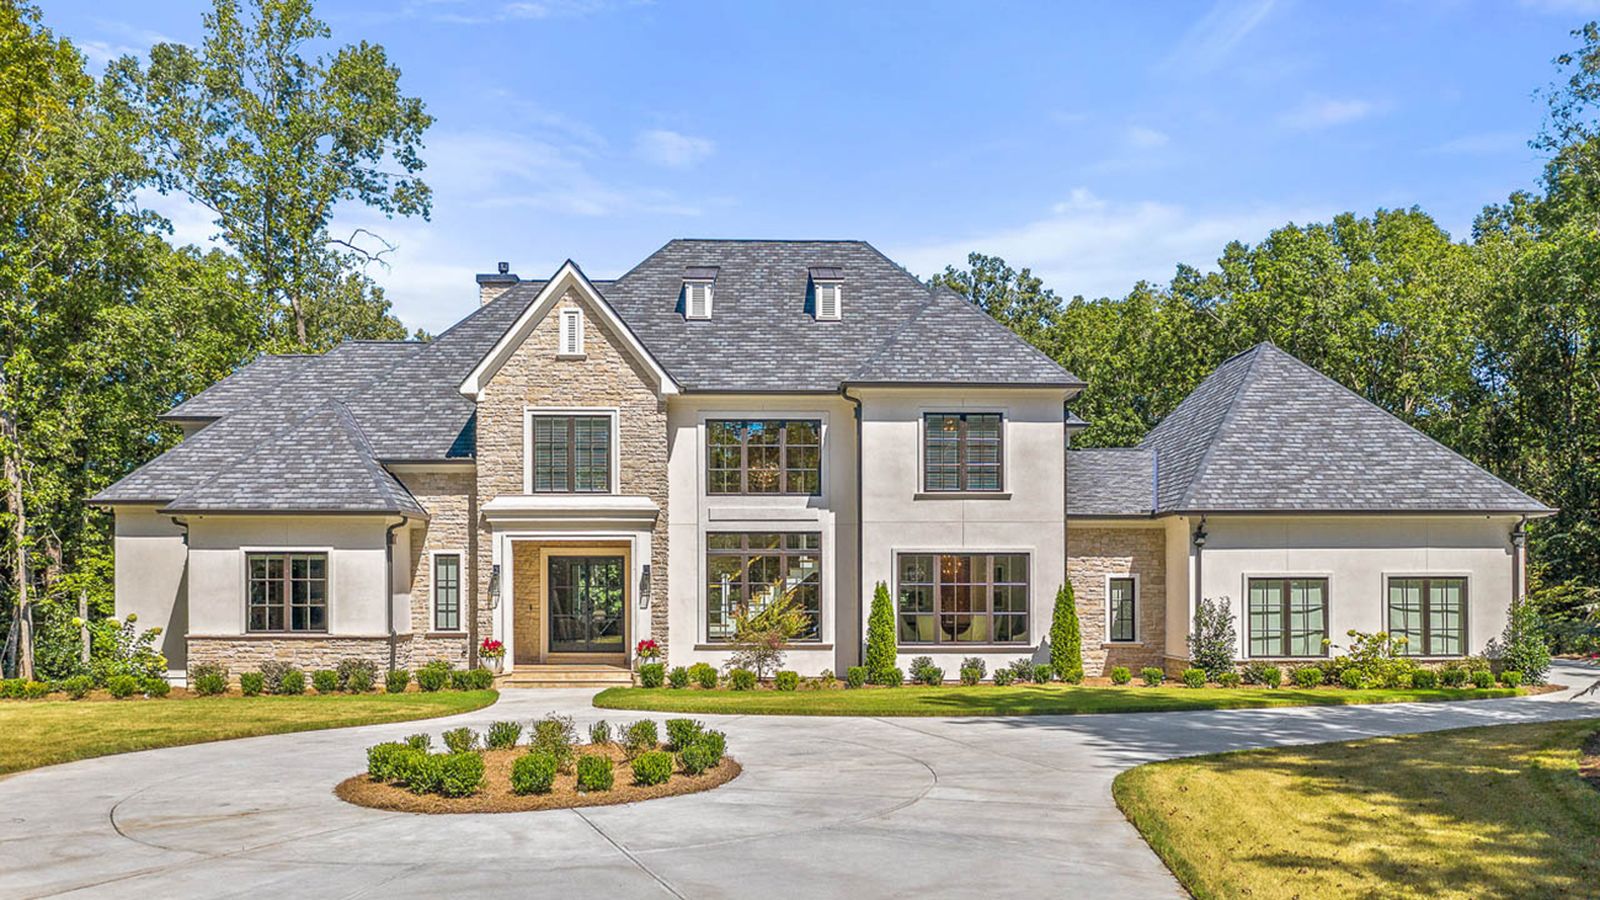 Former Panthers Fullback Mike Tolbert S Custom Home Listed For 2 4m Axios Charlotte